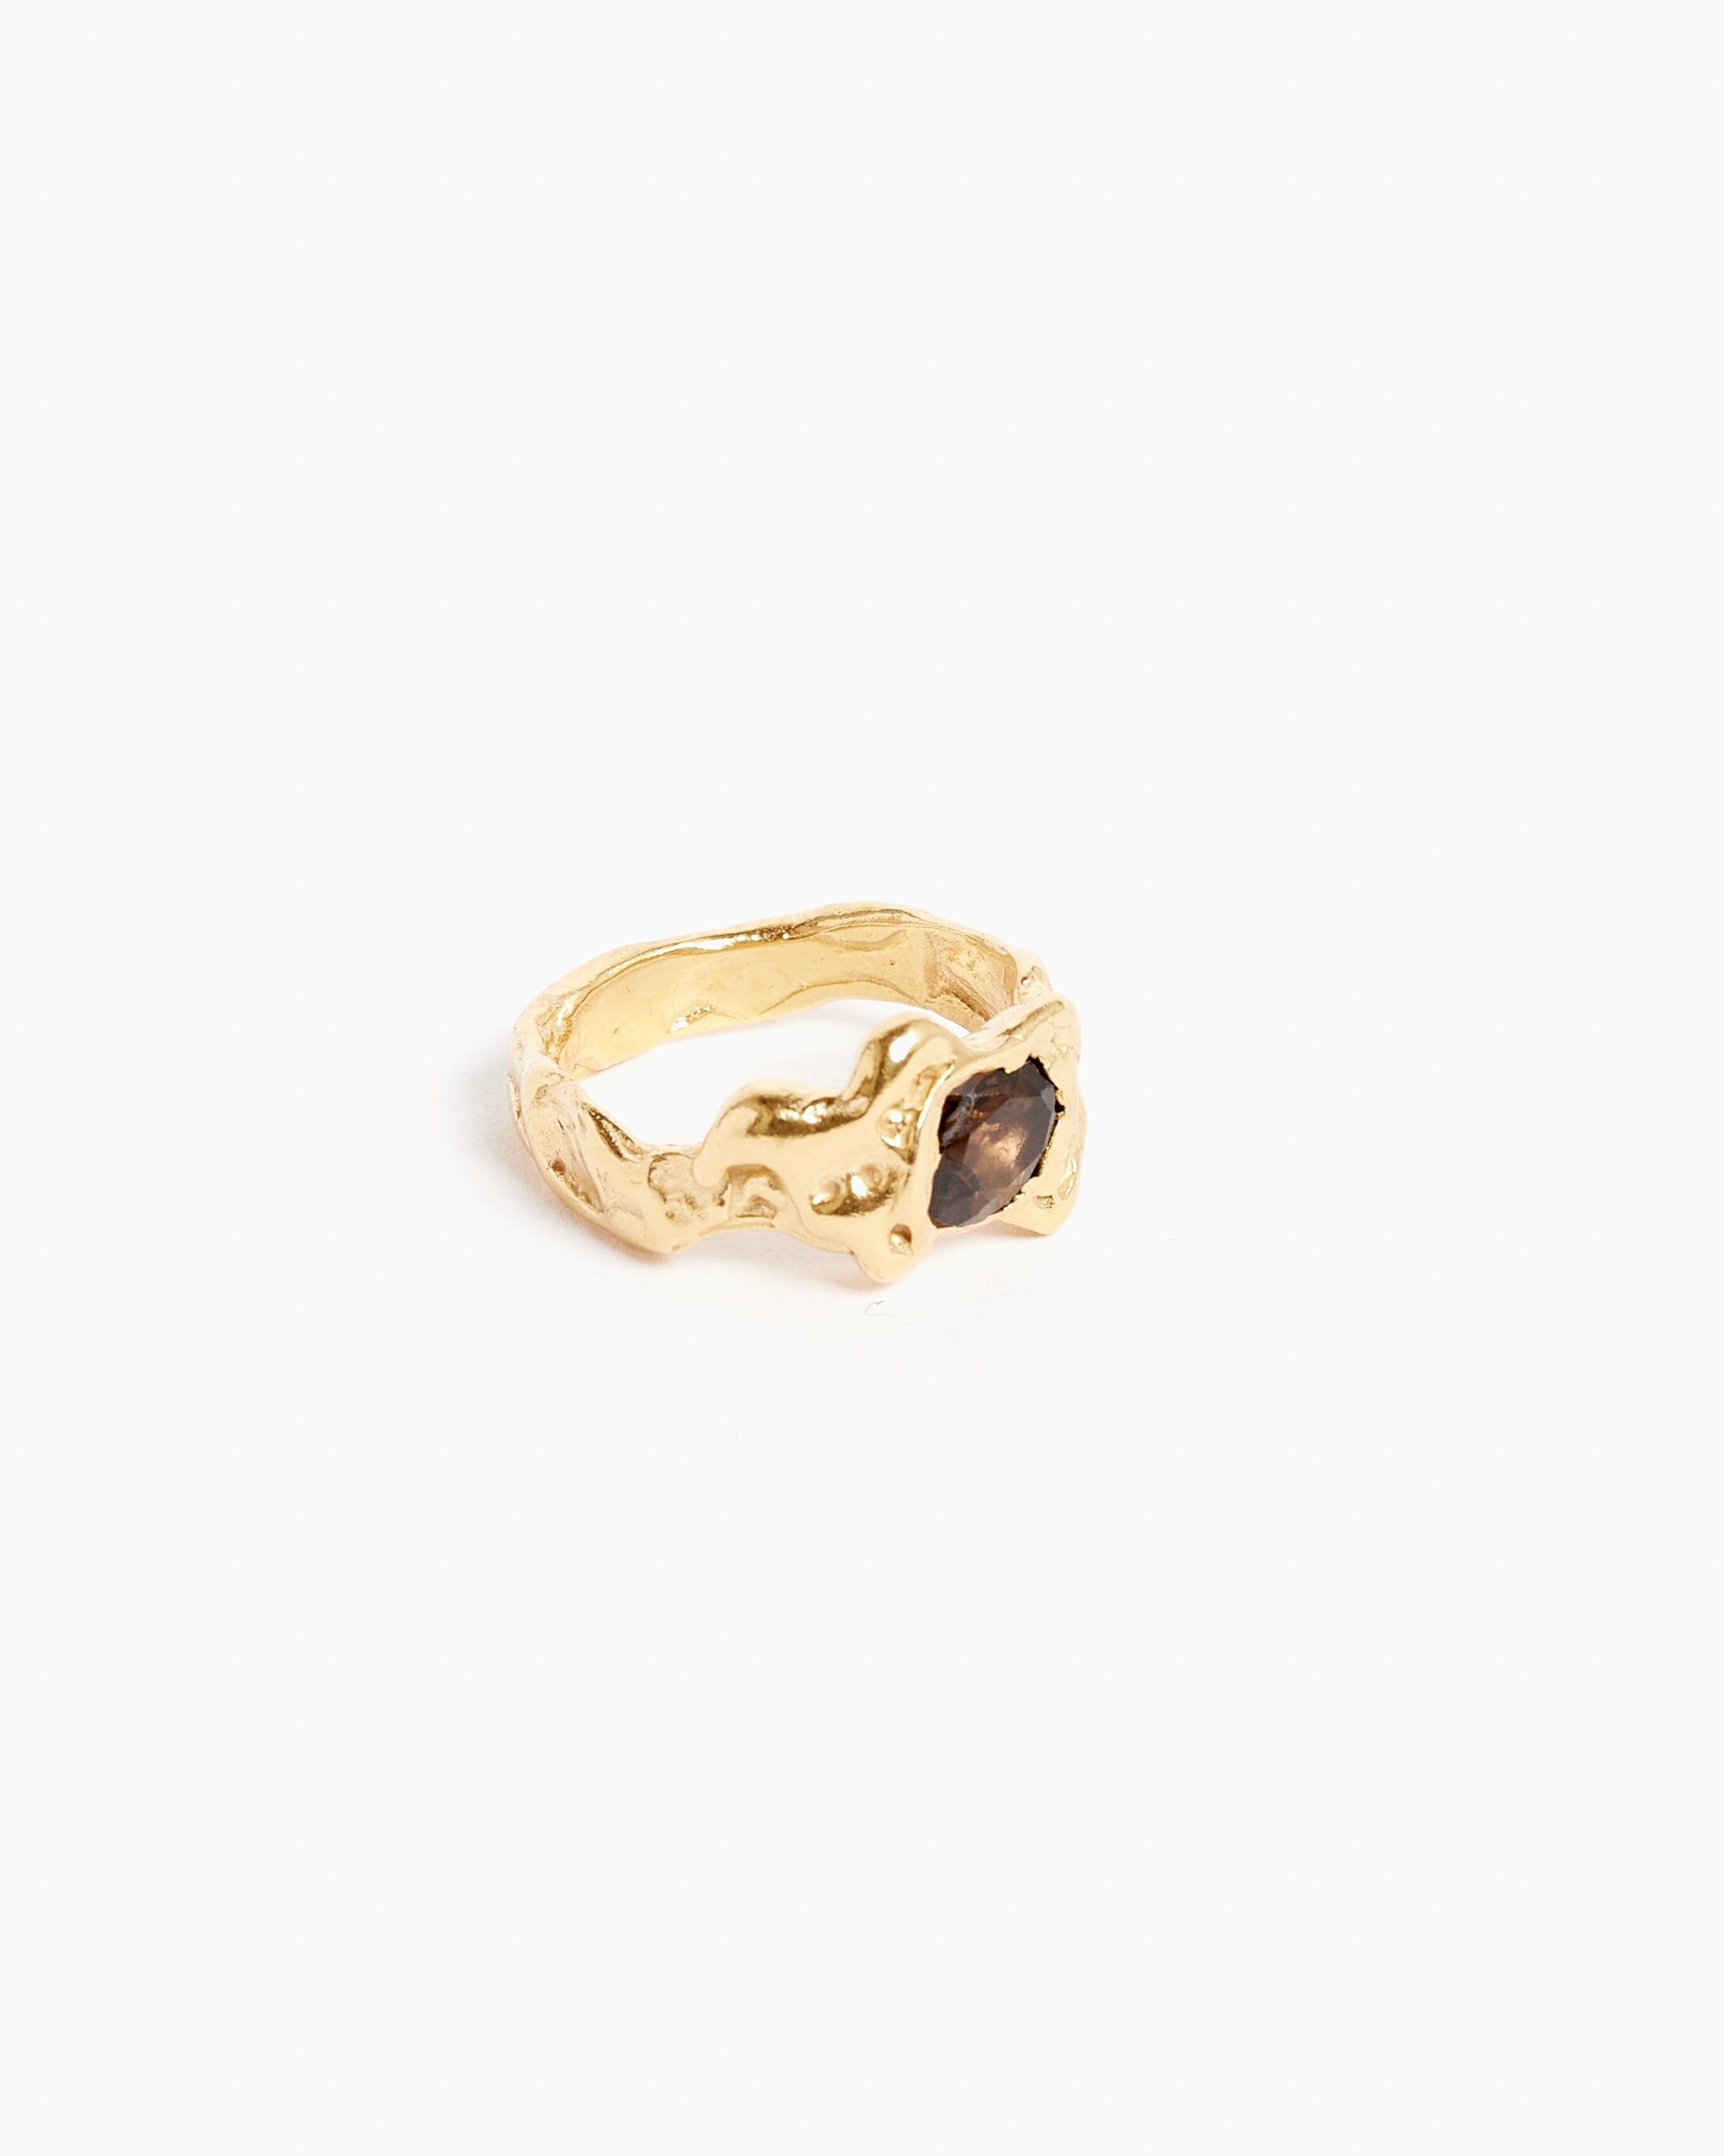 Ola Ring in 18K Plated Yellow Gold